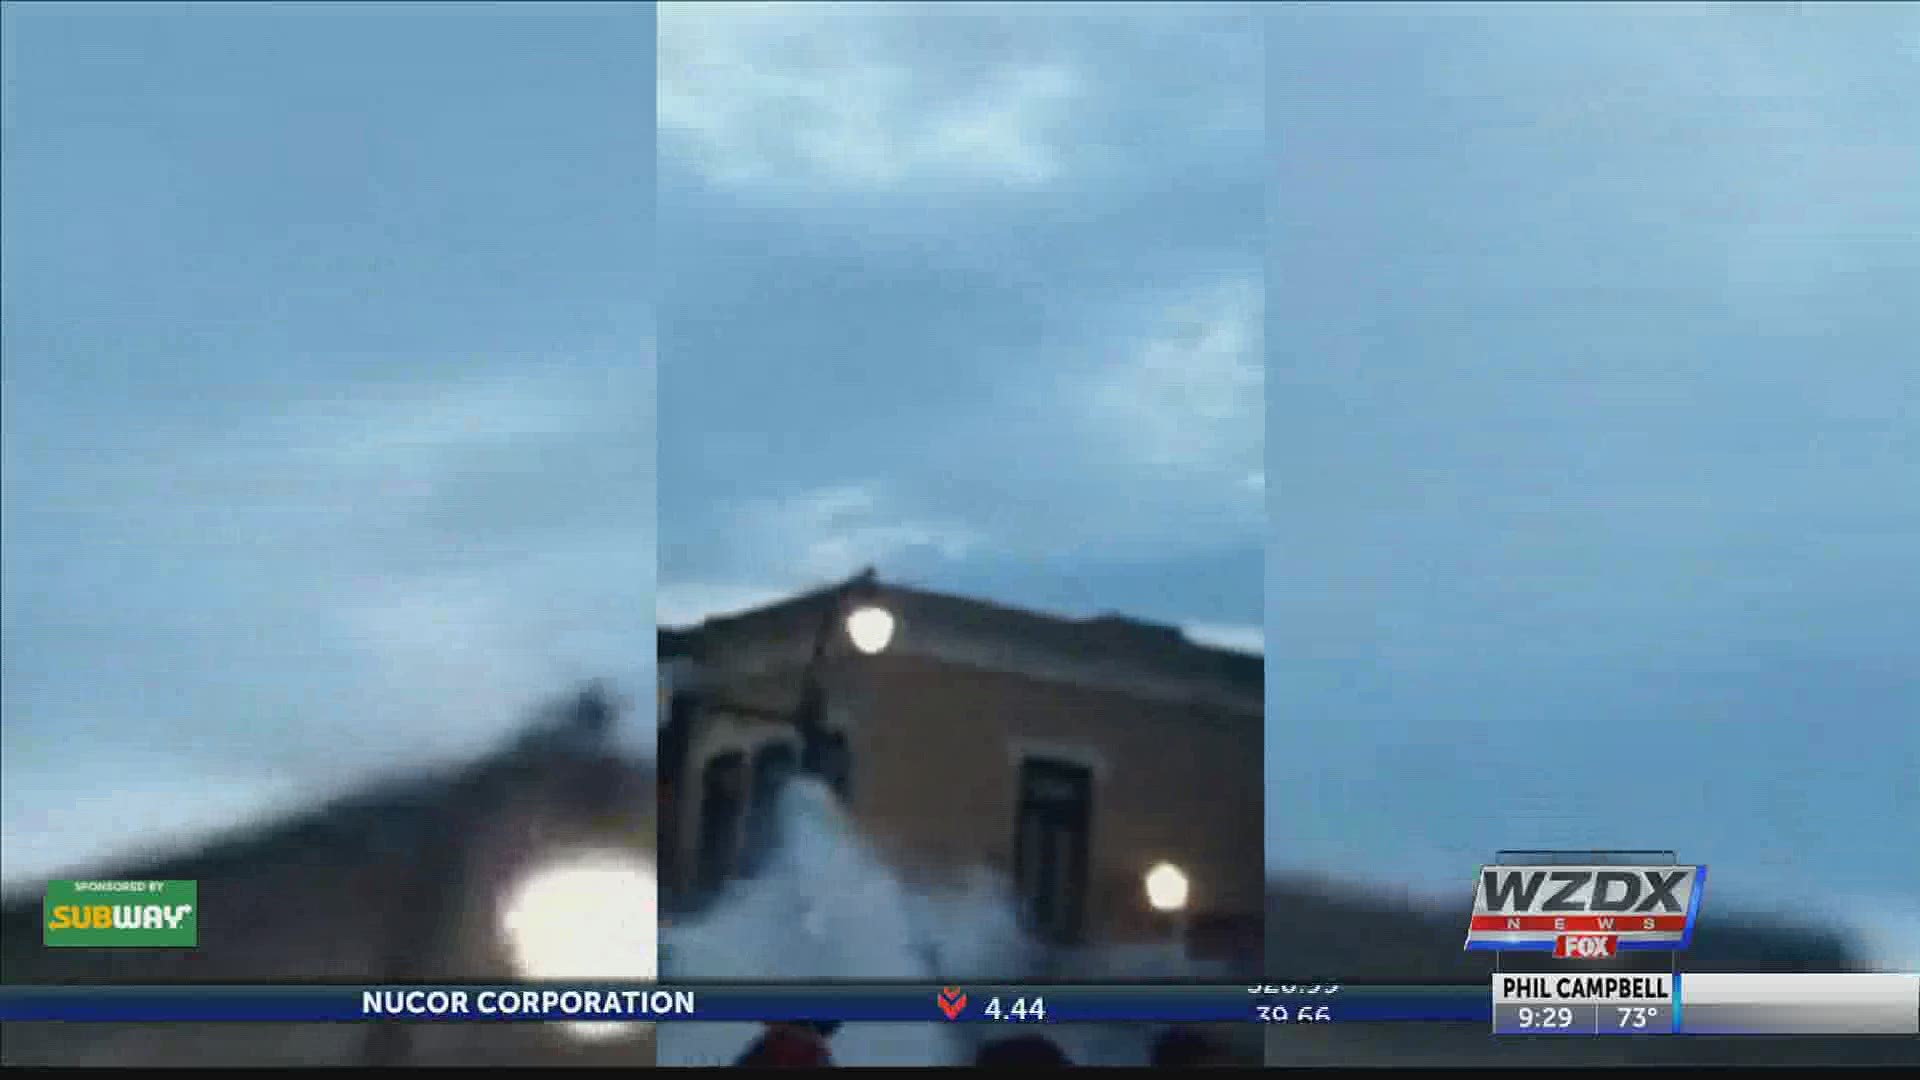 Huntsville Police fired tear gas into crowds of protesters, and it was all caught on camera. The images spread across social media. Locals are calling for answers.